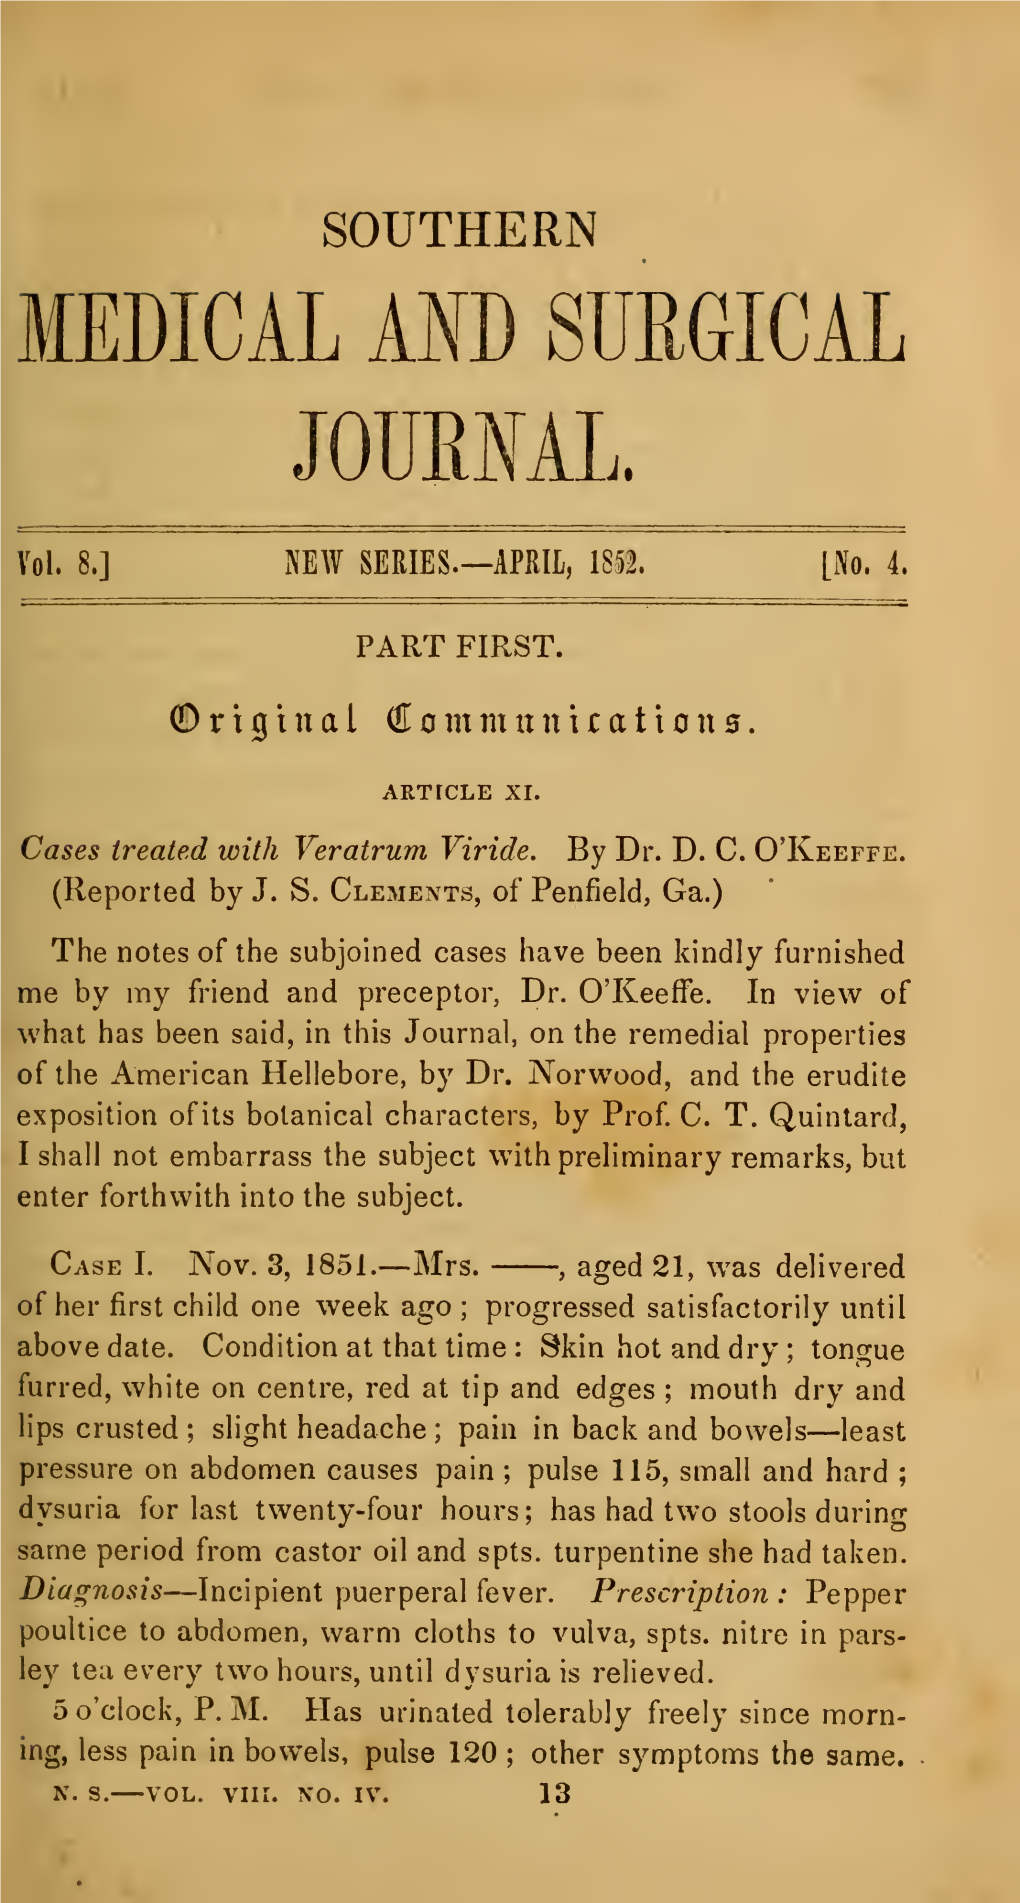 Southern Medical and Surgical Journal